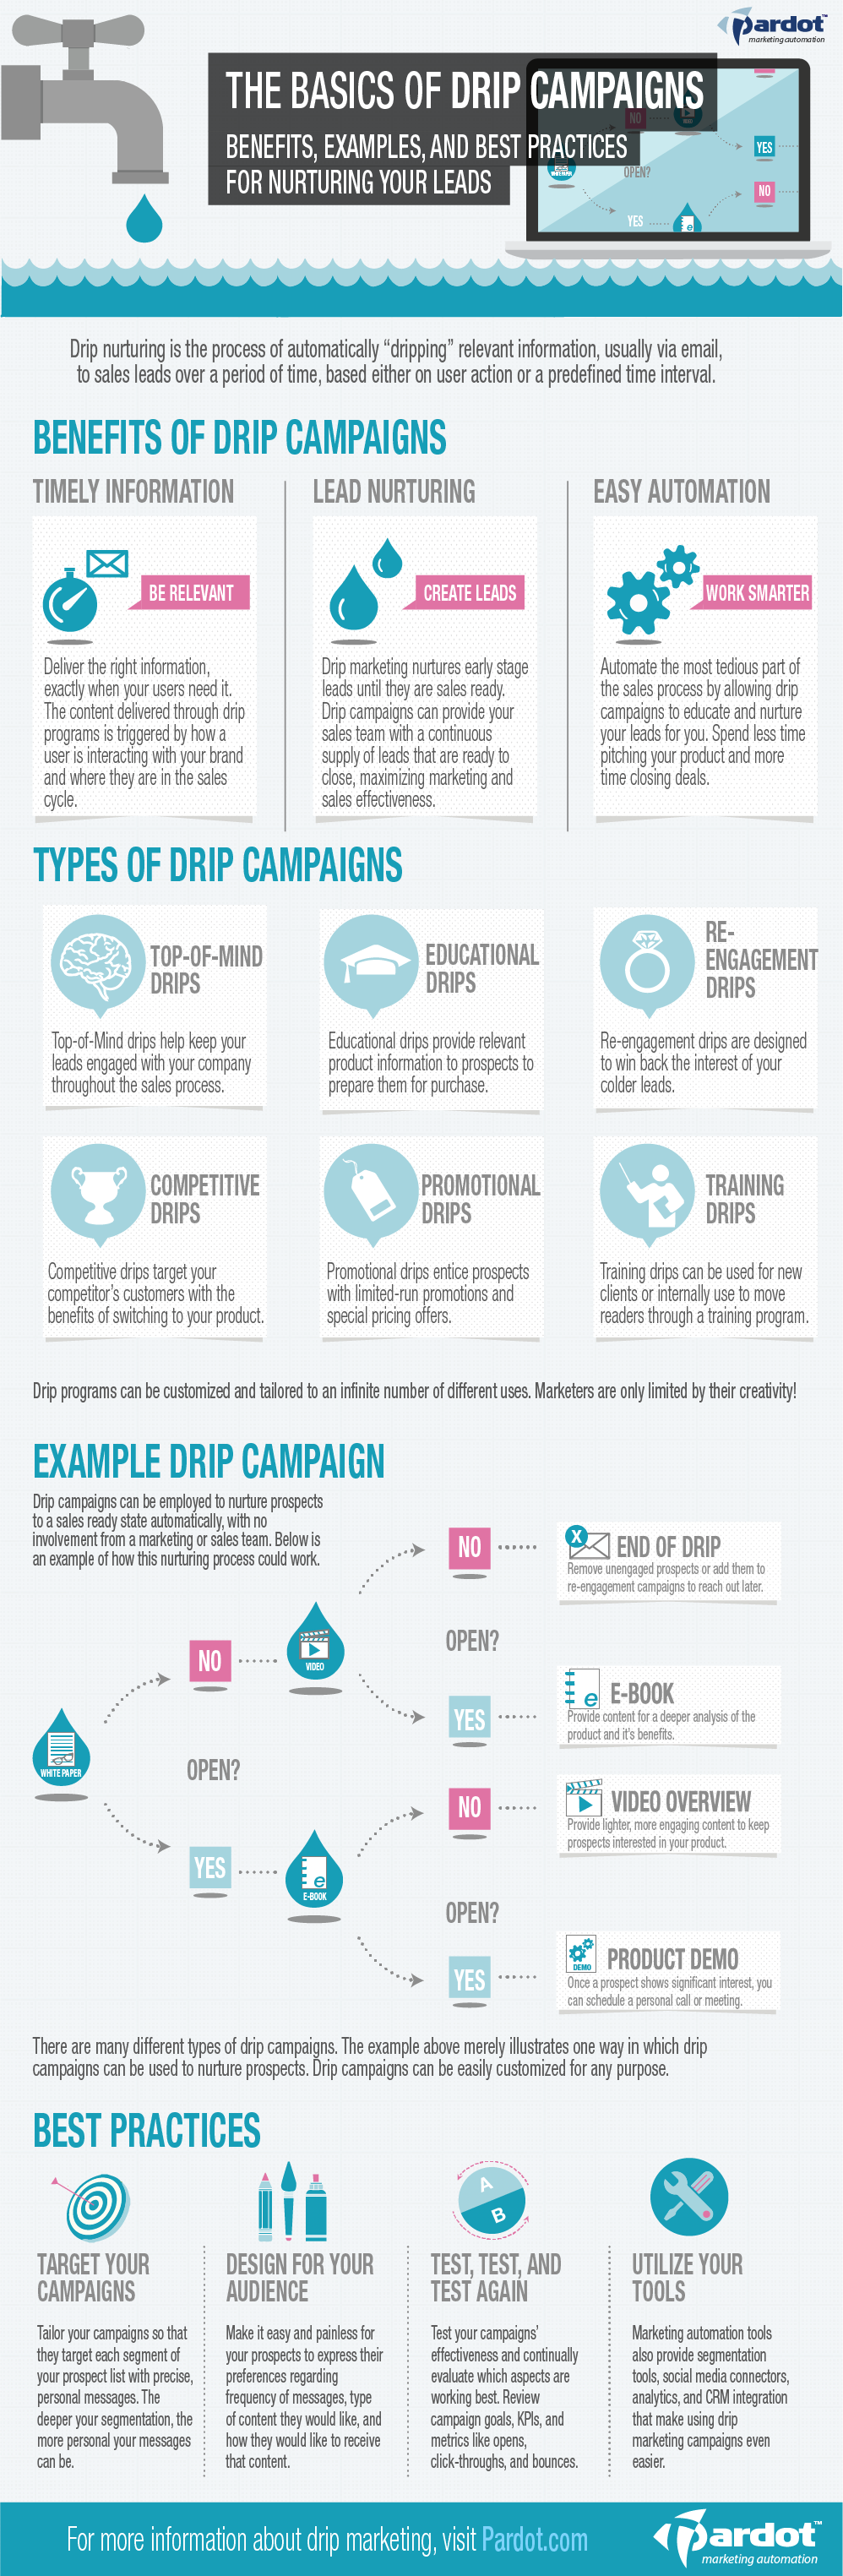 drip campaigns for email marketing infographic